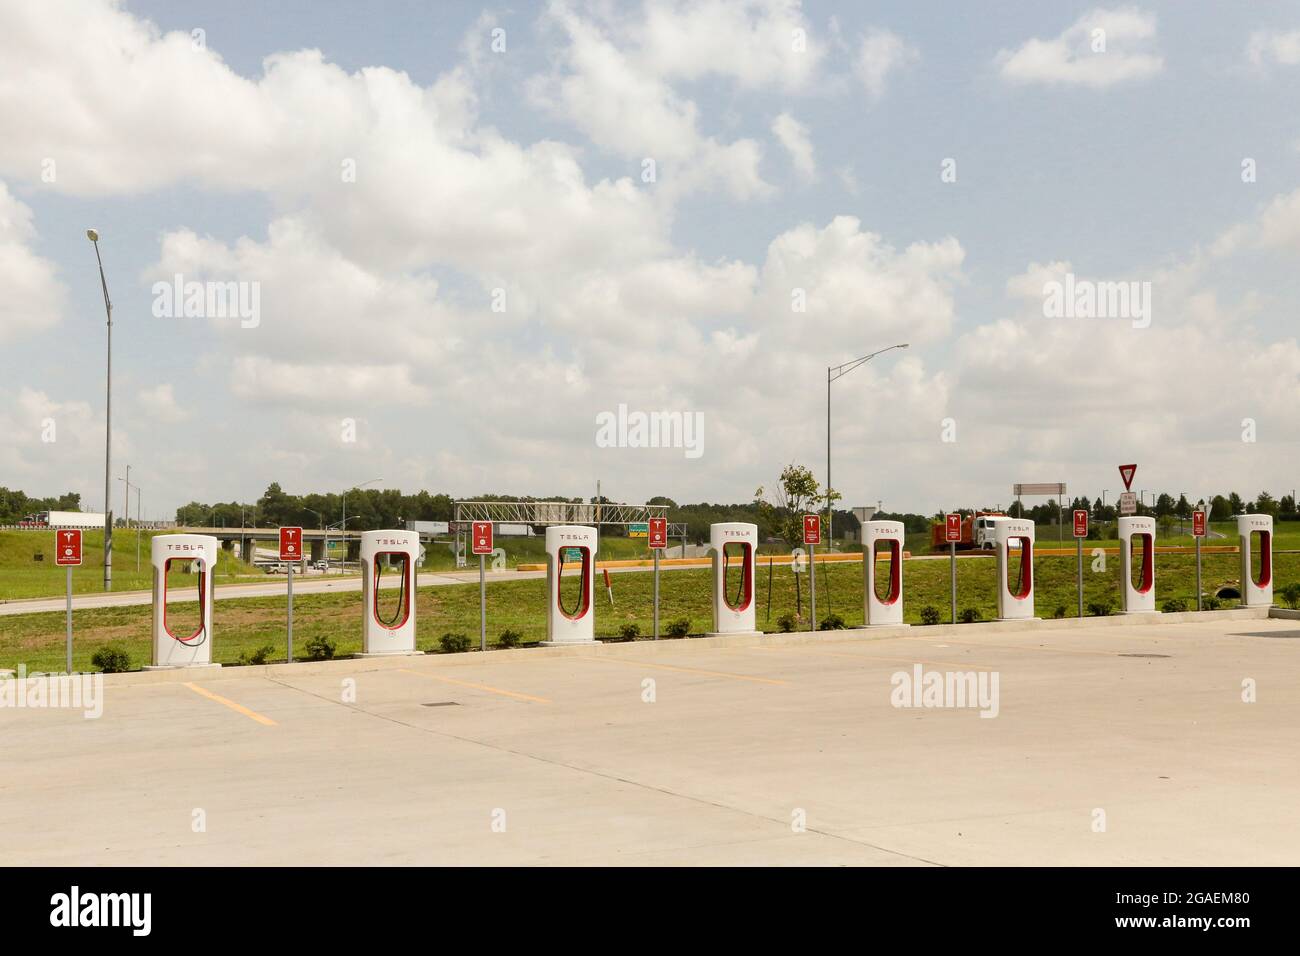 Usa 27th July 21 In Southern Missouri Off An I 40 Highway Ramp At A Kum Go Gas Station Is A Tesla Supercharger Station Shown Here On July 27 21 Tesla Owns